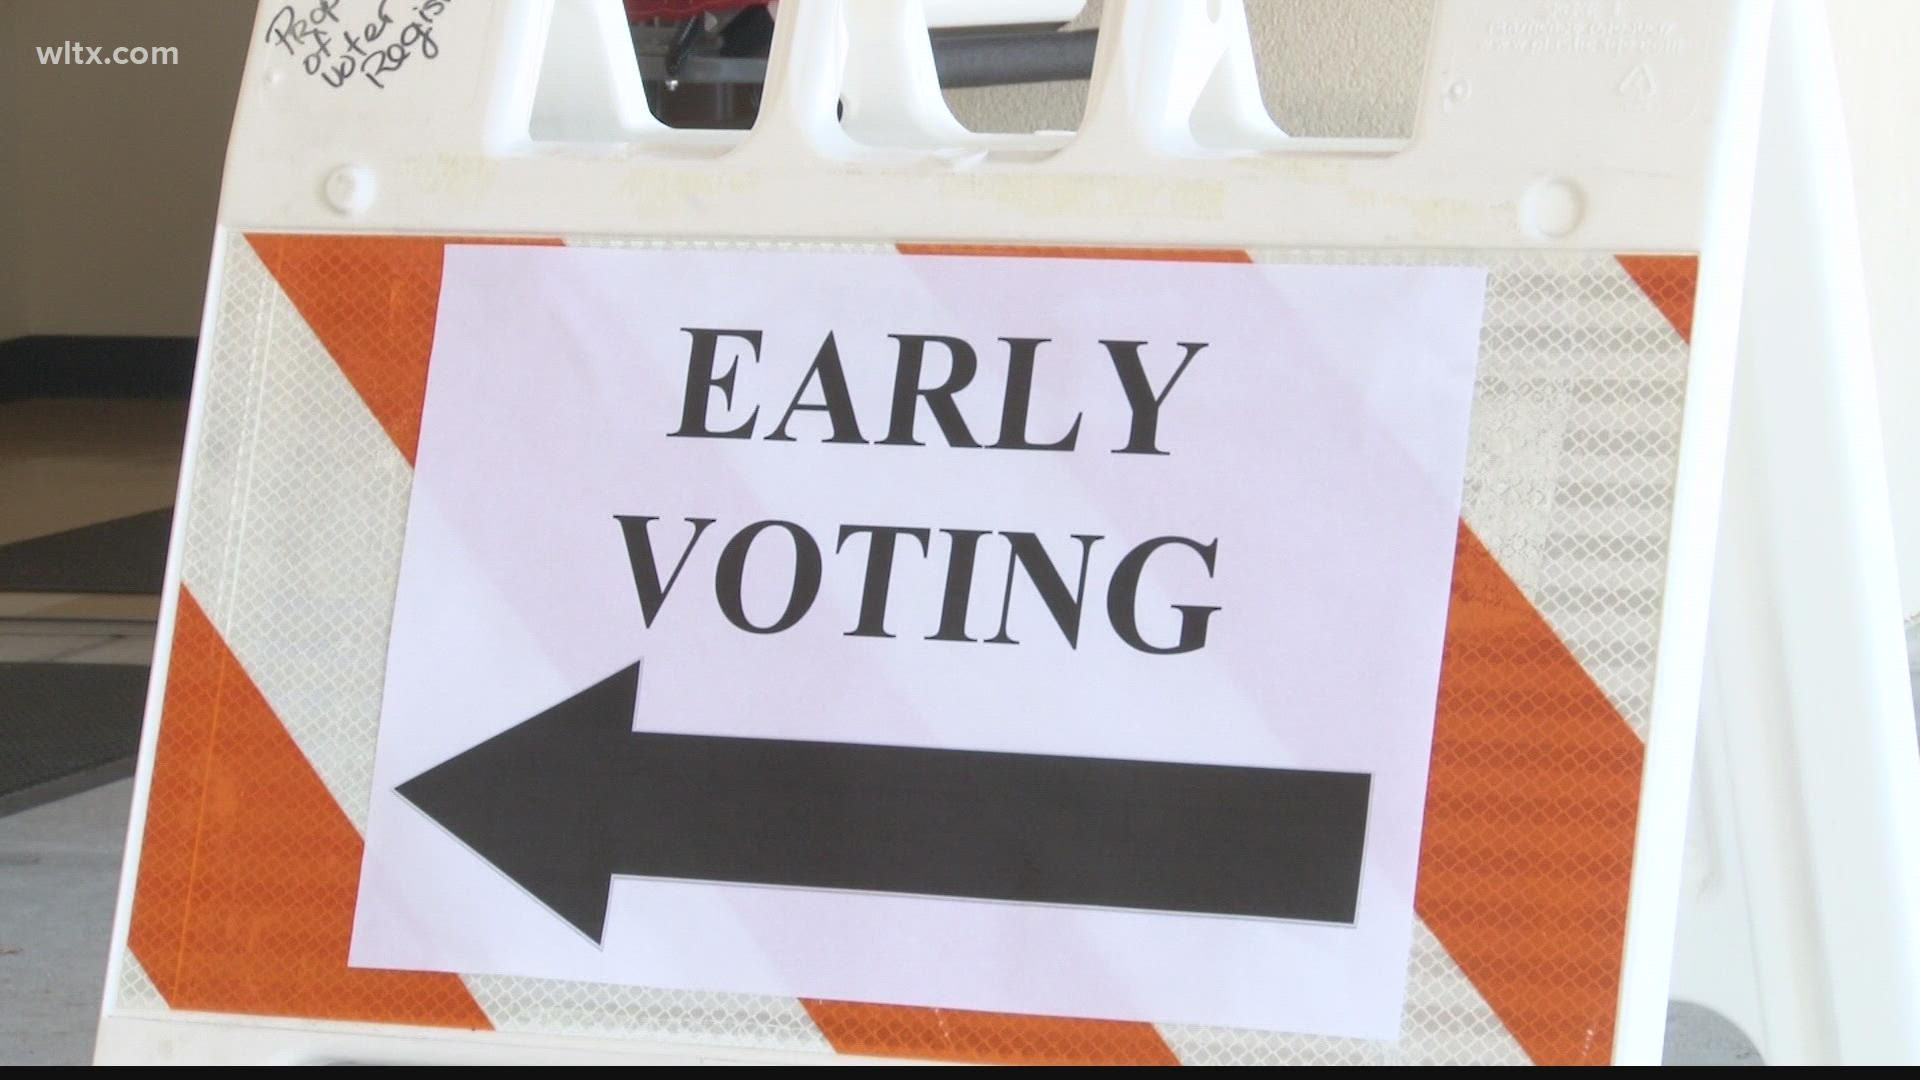 Early voting started today -- ahead of south Carolina's June 14th primaries.